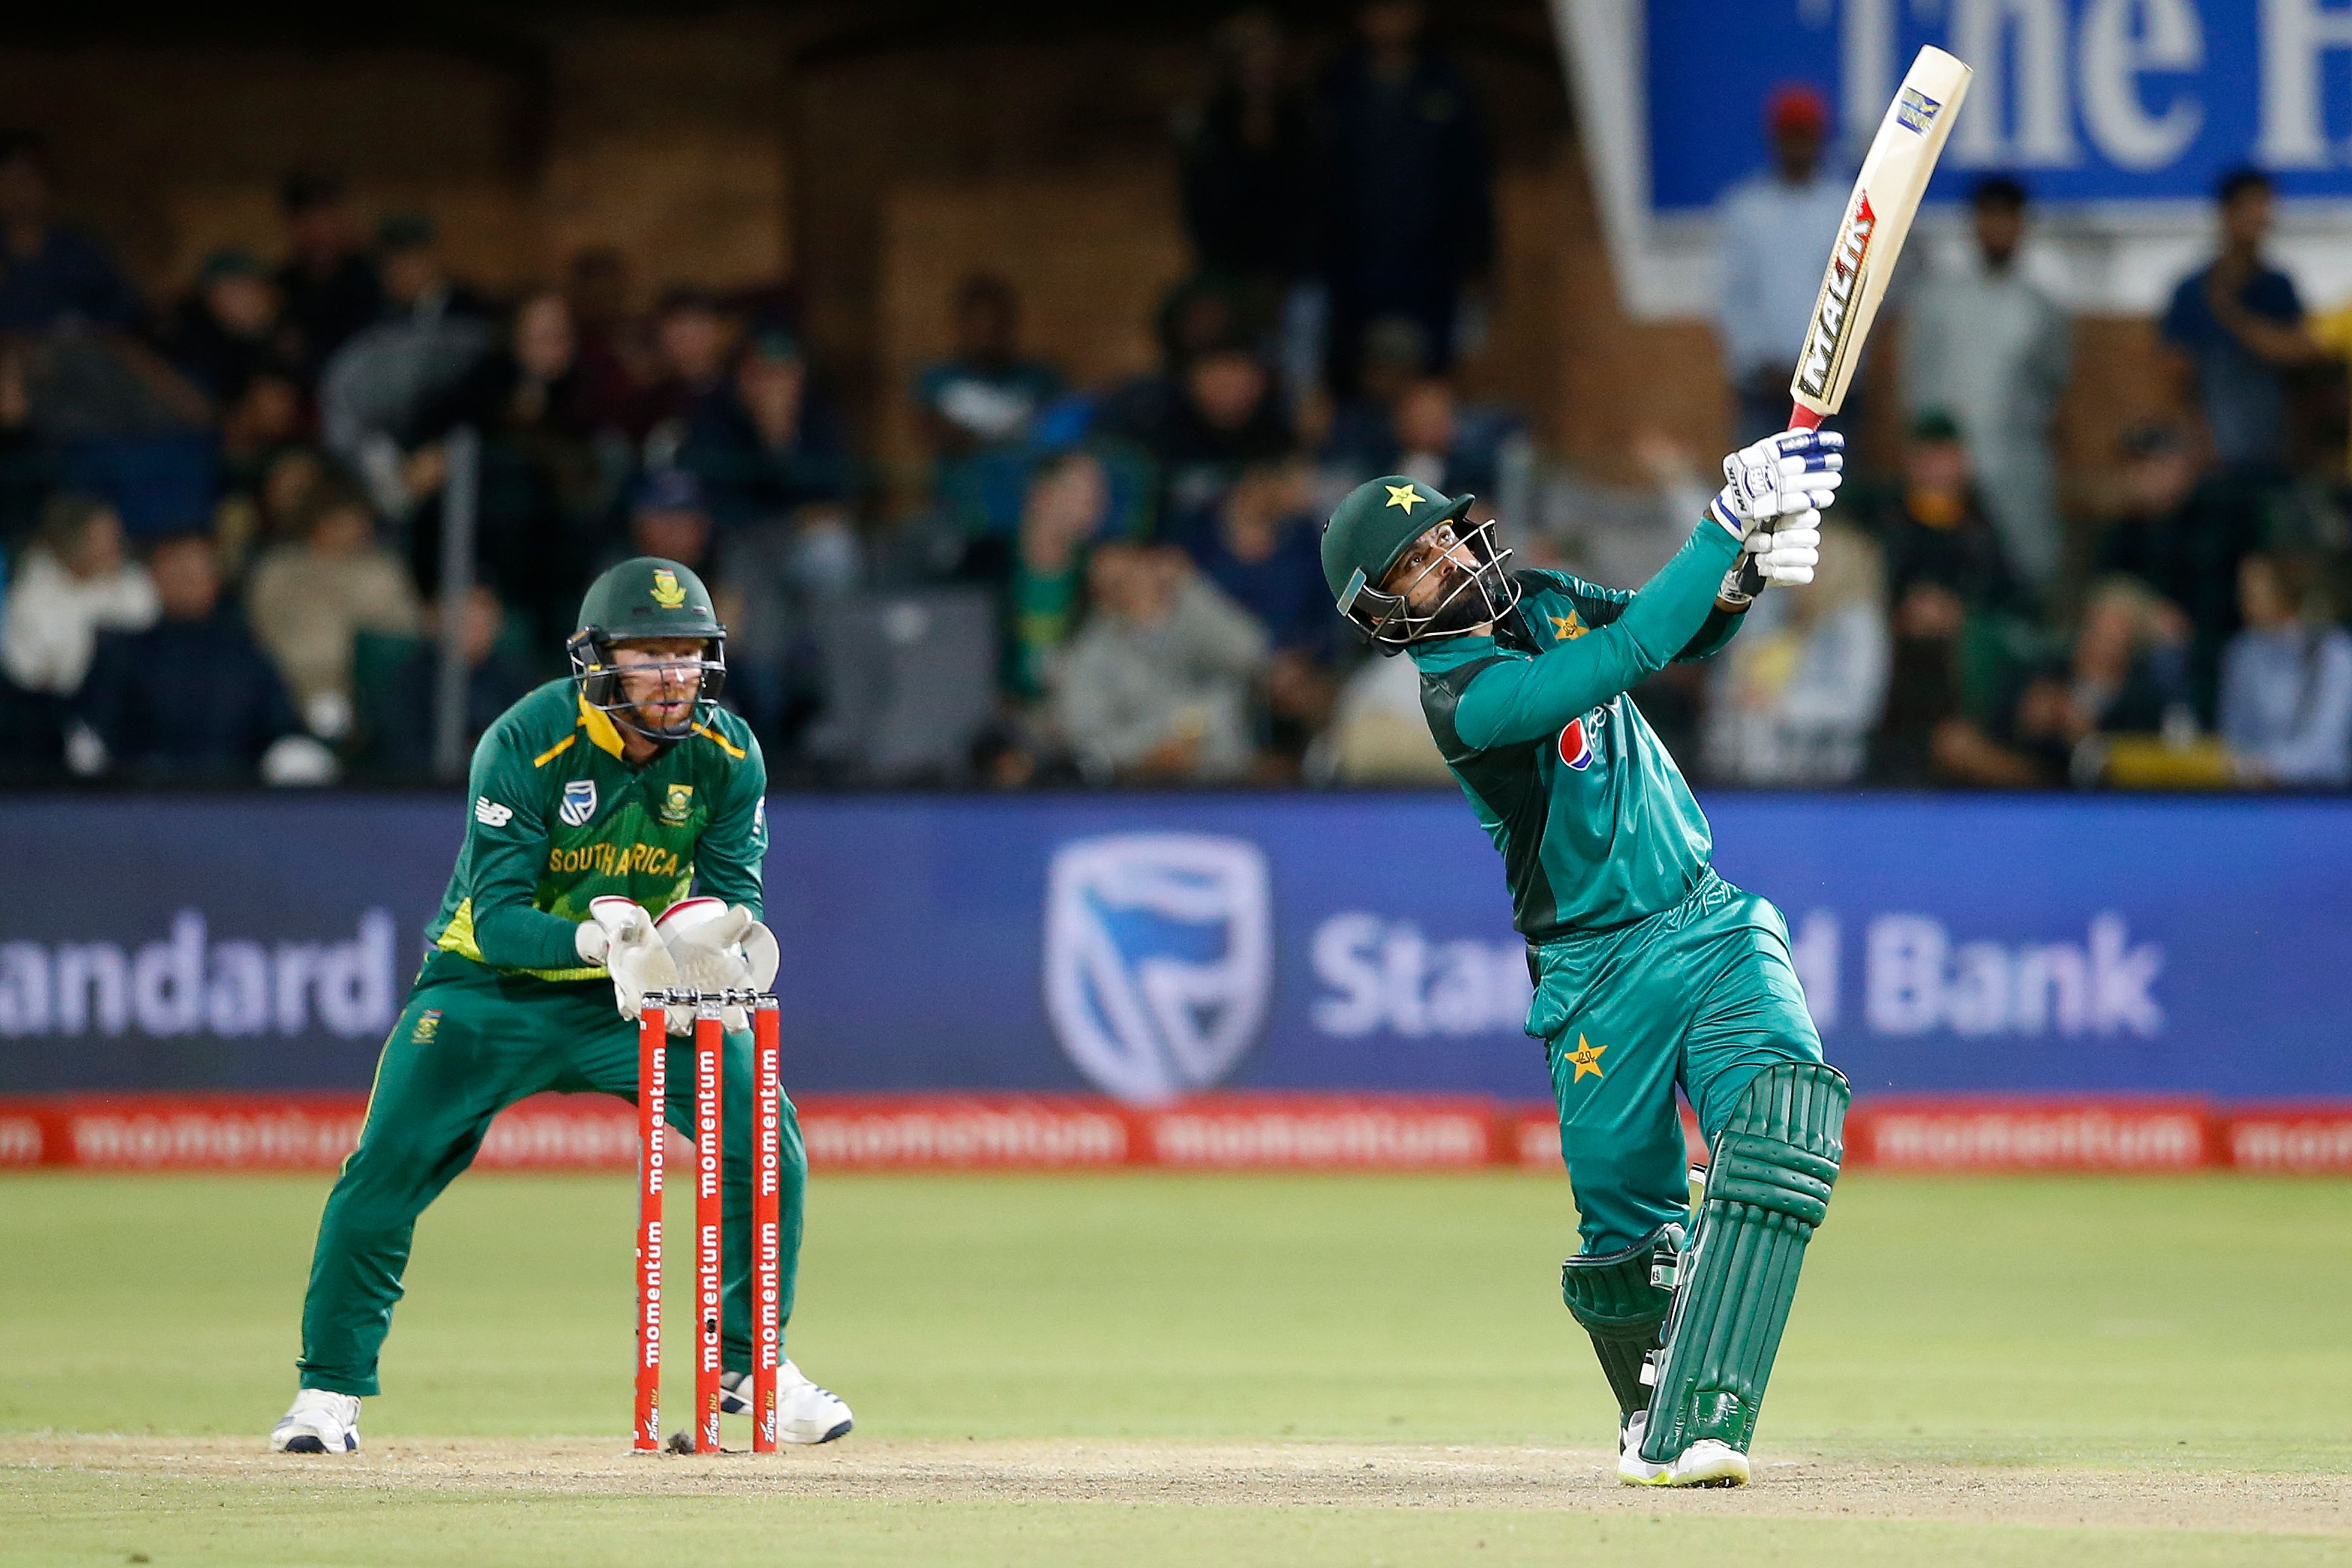 Ice-cool Hafeez seals thriller as Pakistan claim 1-0 lead over South Africa